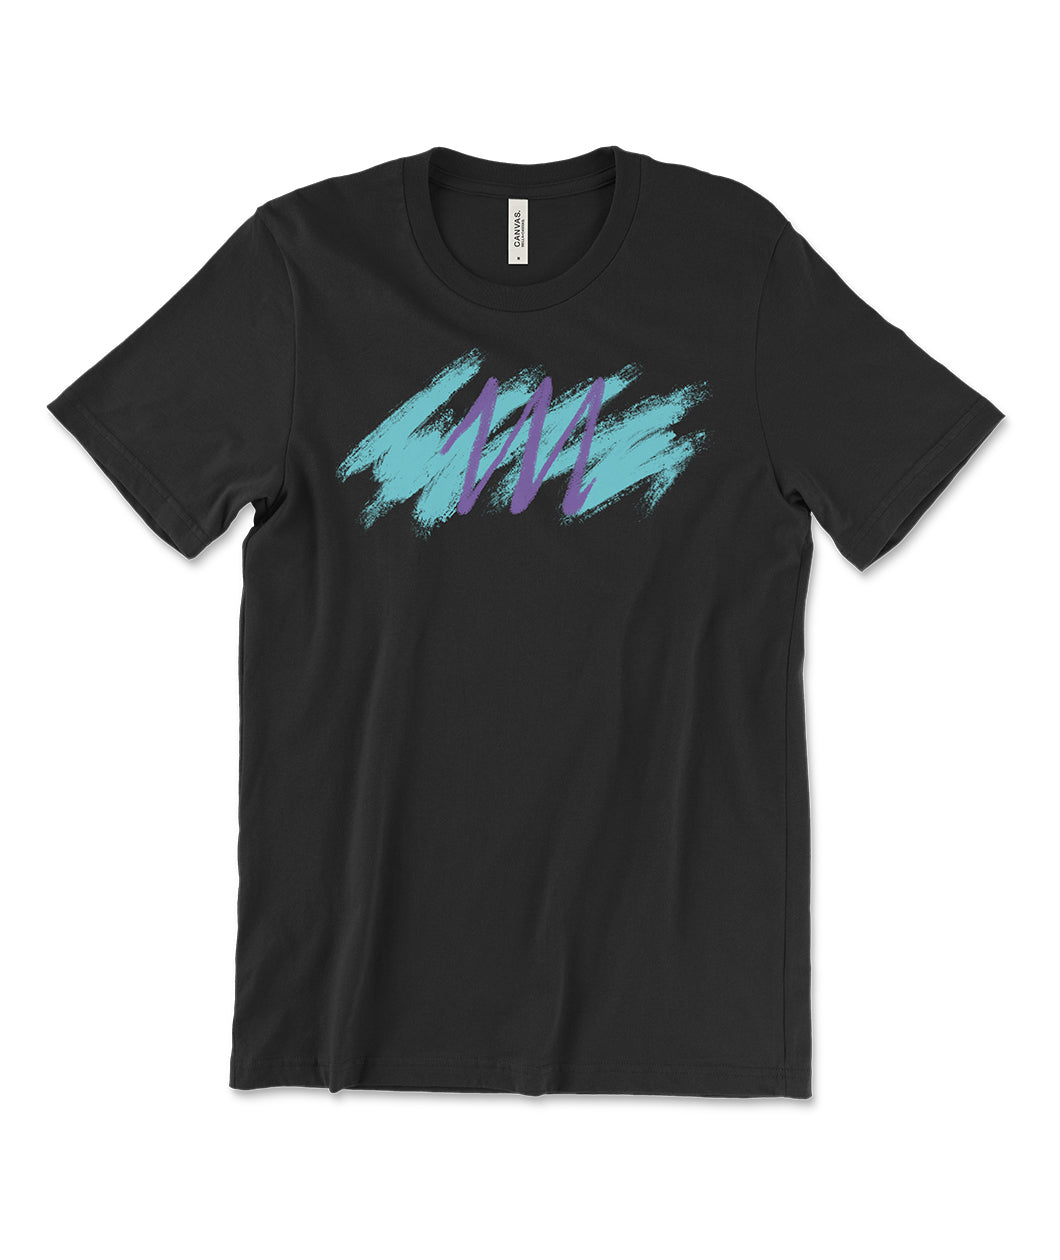 A black t-shirt with a light blue brushstroke behind a purple, capital 